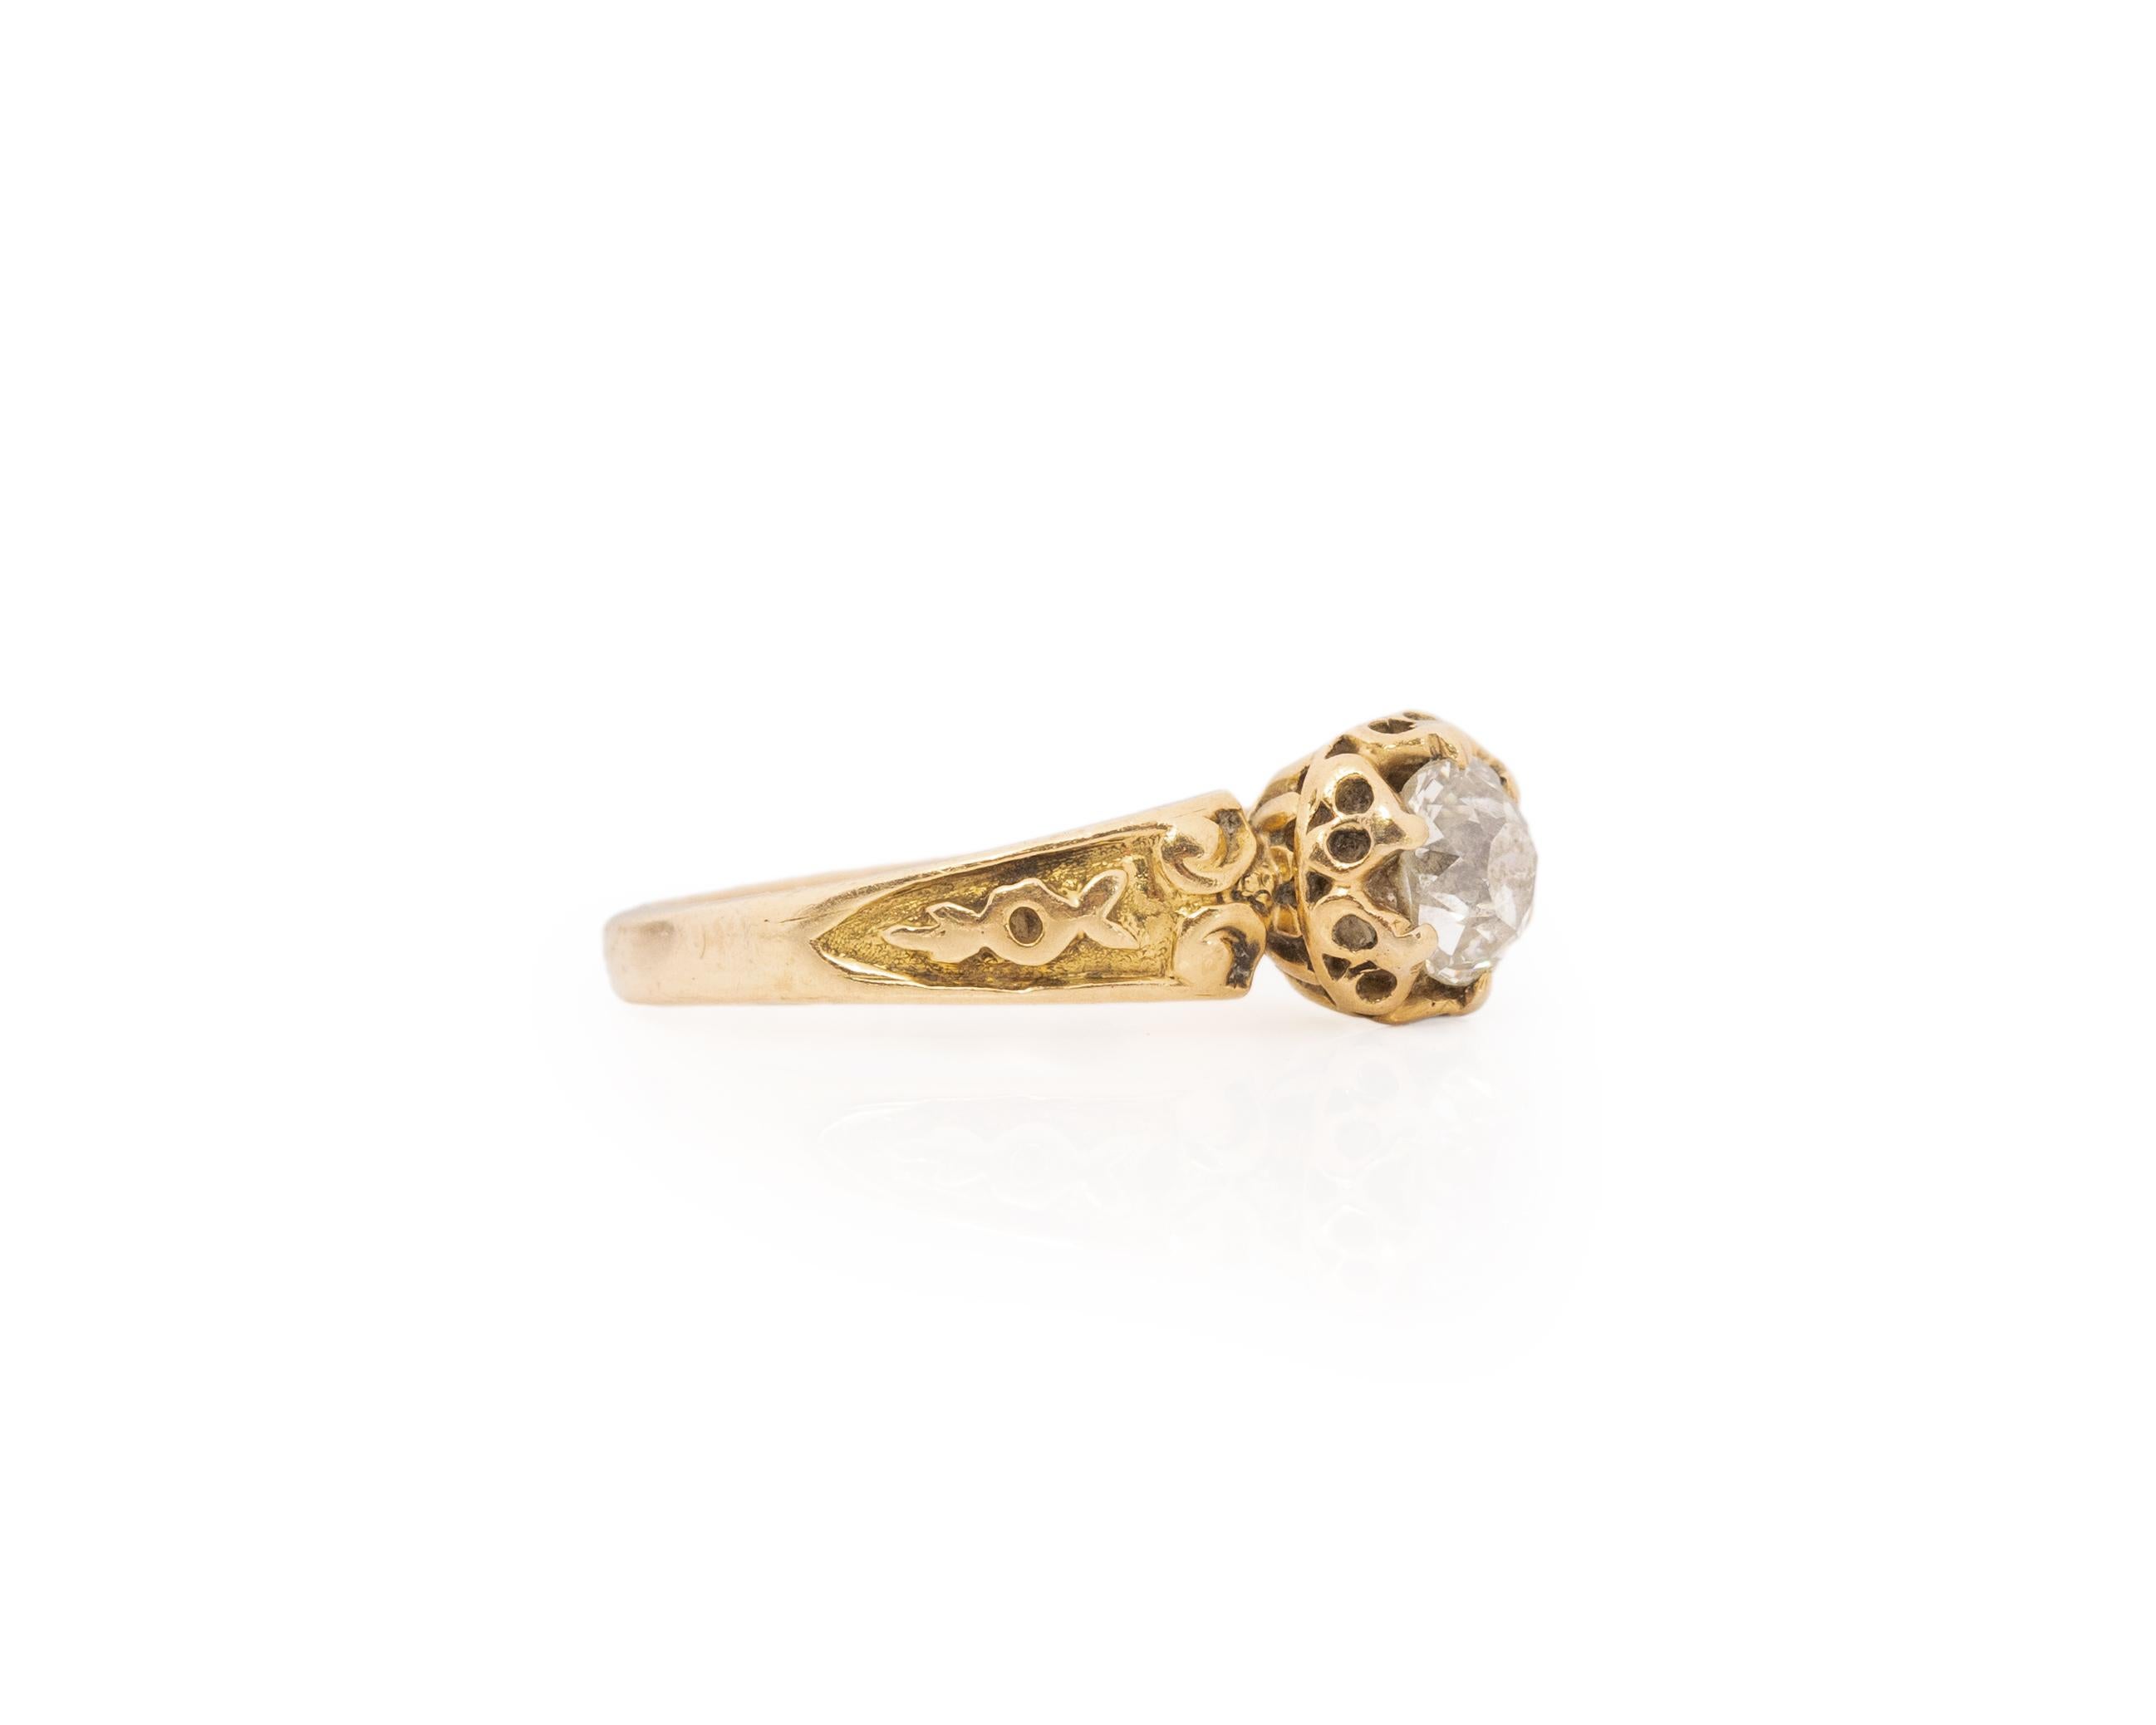 Ring Size: 6
Metal Type: 14K Yellow Gold [Hallmarked, and Tested]
Weight: 3.0 grams

Center Diamond Details:

Natural Diamond
Weight: .75ct
Cut: Old Mine Brilliant
Color: I
Clarity: VS1

Finger to Top of Stone Measurement: 4.5mm
Shank/Band Width: